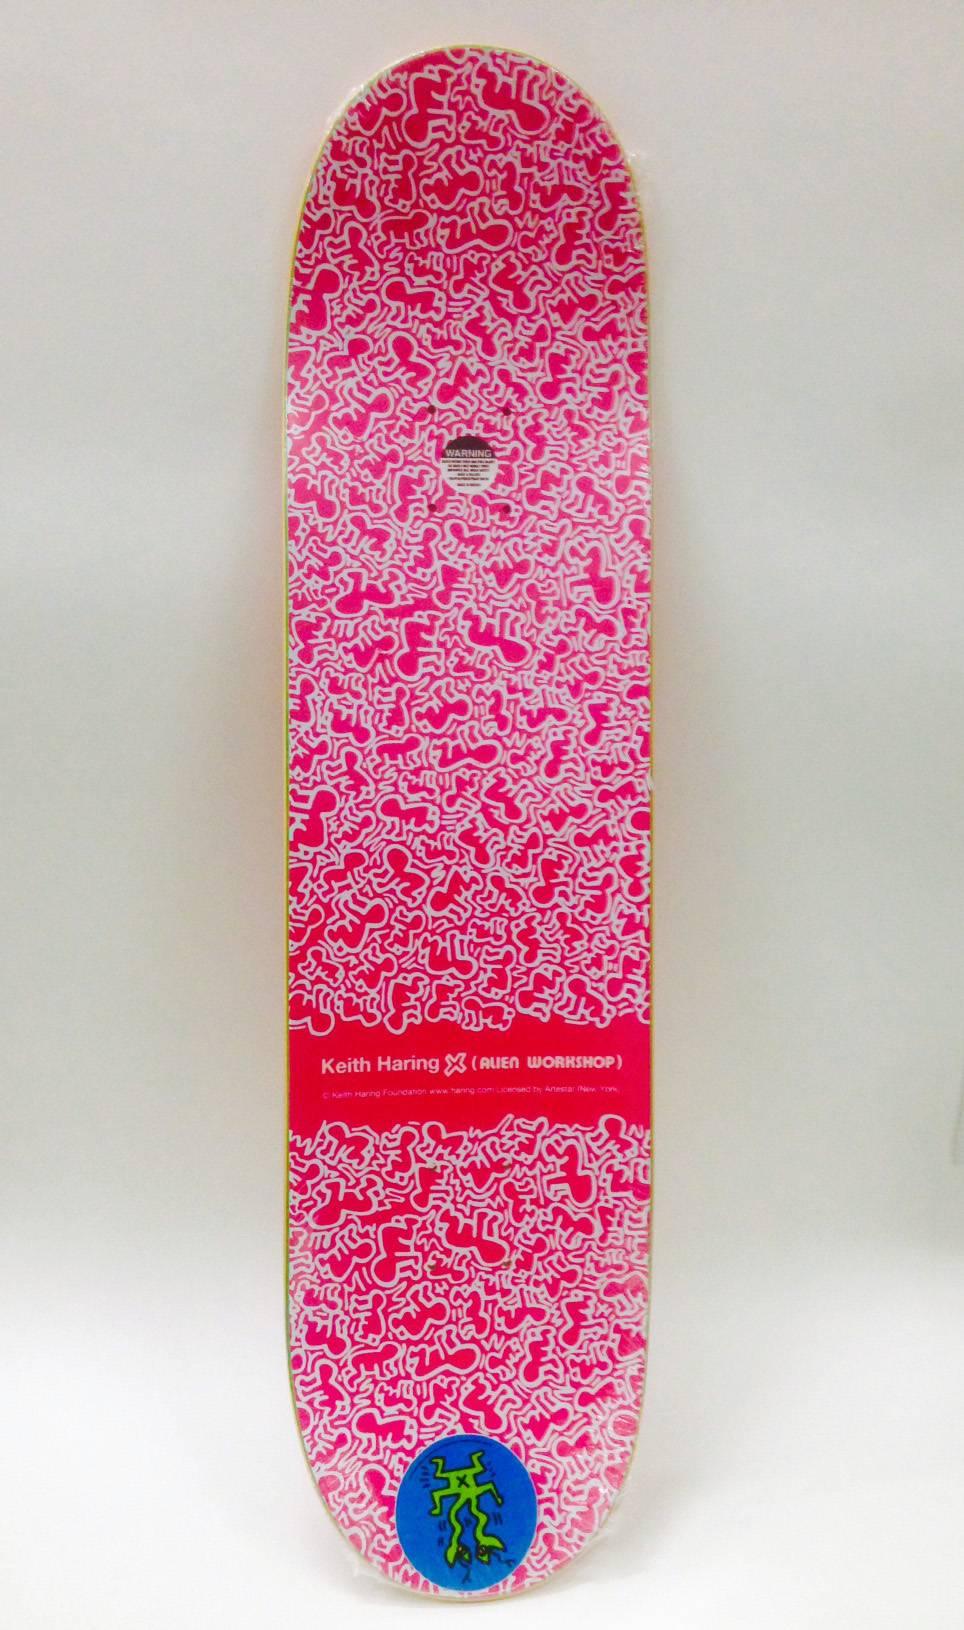 Keith Haring Skateboard Deck  - Print by (after) Keith Haring